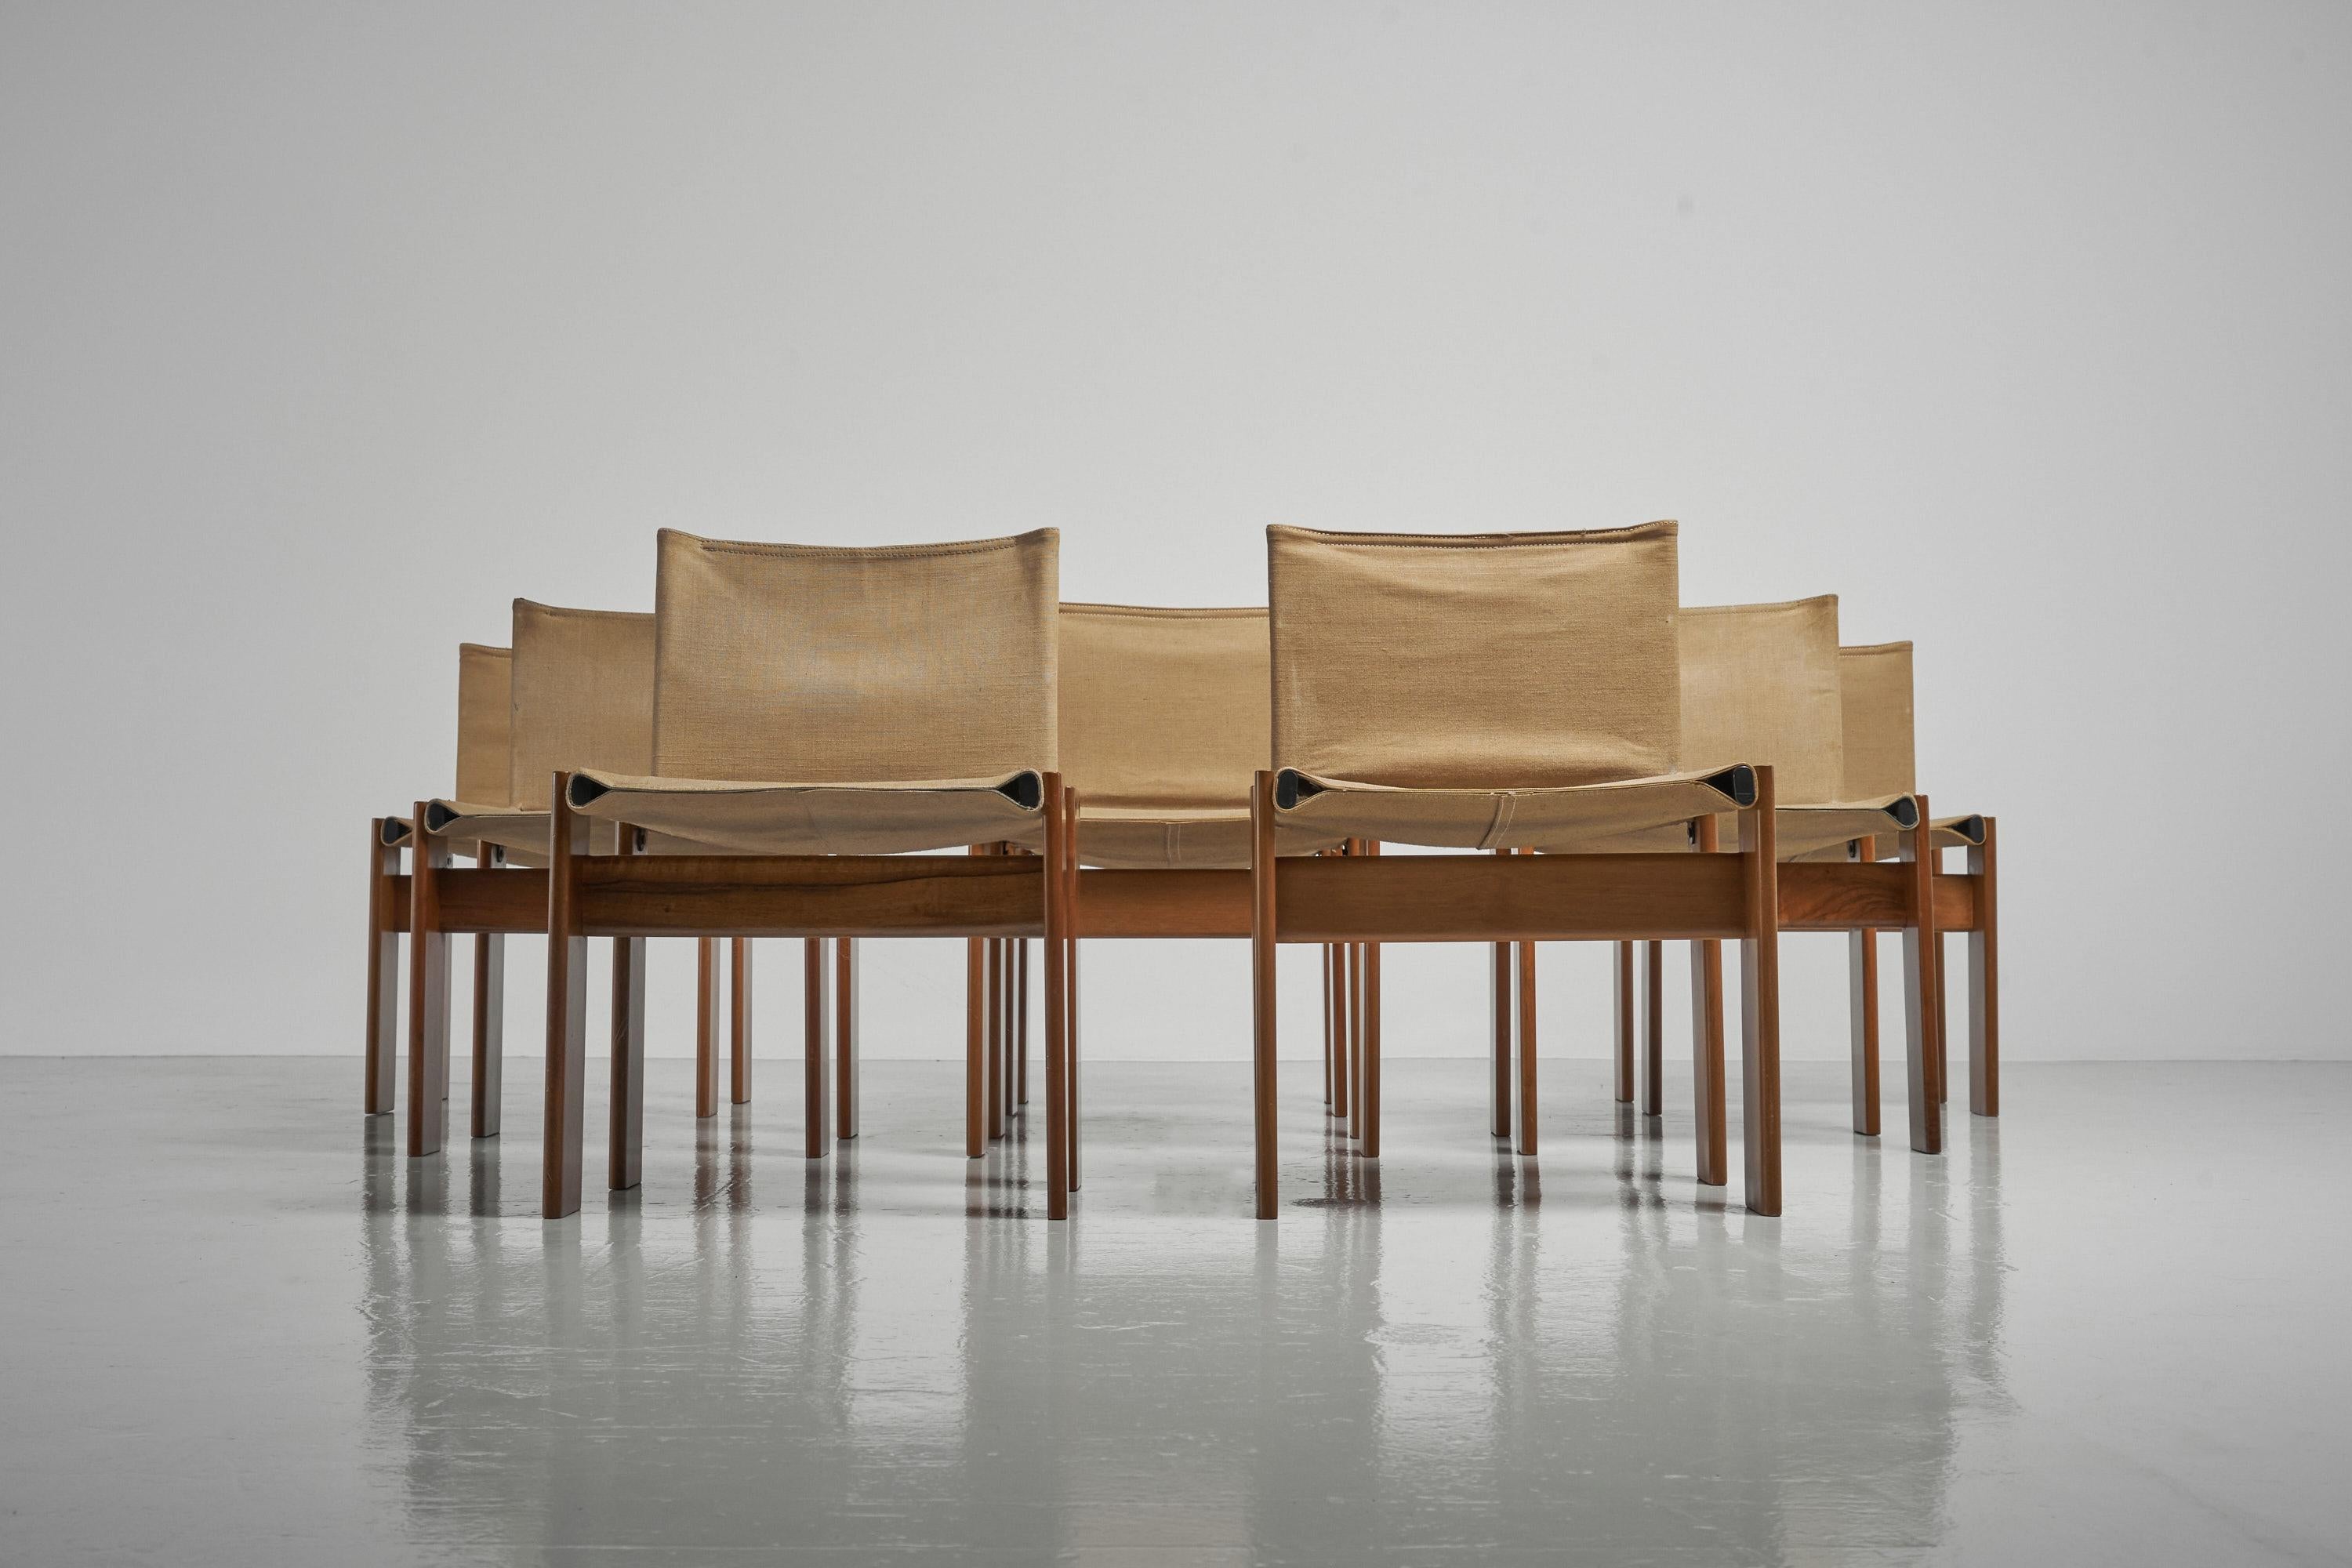 Iconic set of 8 so called 'Monk' dining chairs designed by Afra e Tobia Scarpa and manufactured by Molteni, Italy 1974. This is for a set of 8 chairs with solid walnut wooden frames and beautiful patinated natural canvas seats. The beautiful thick